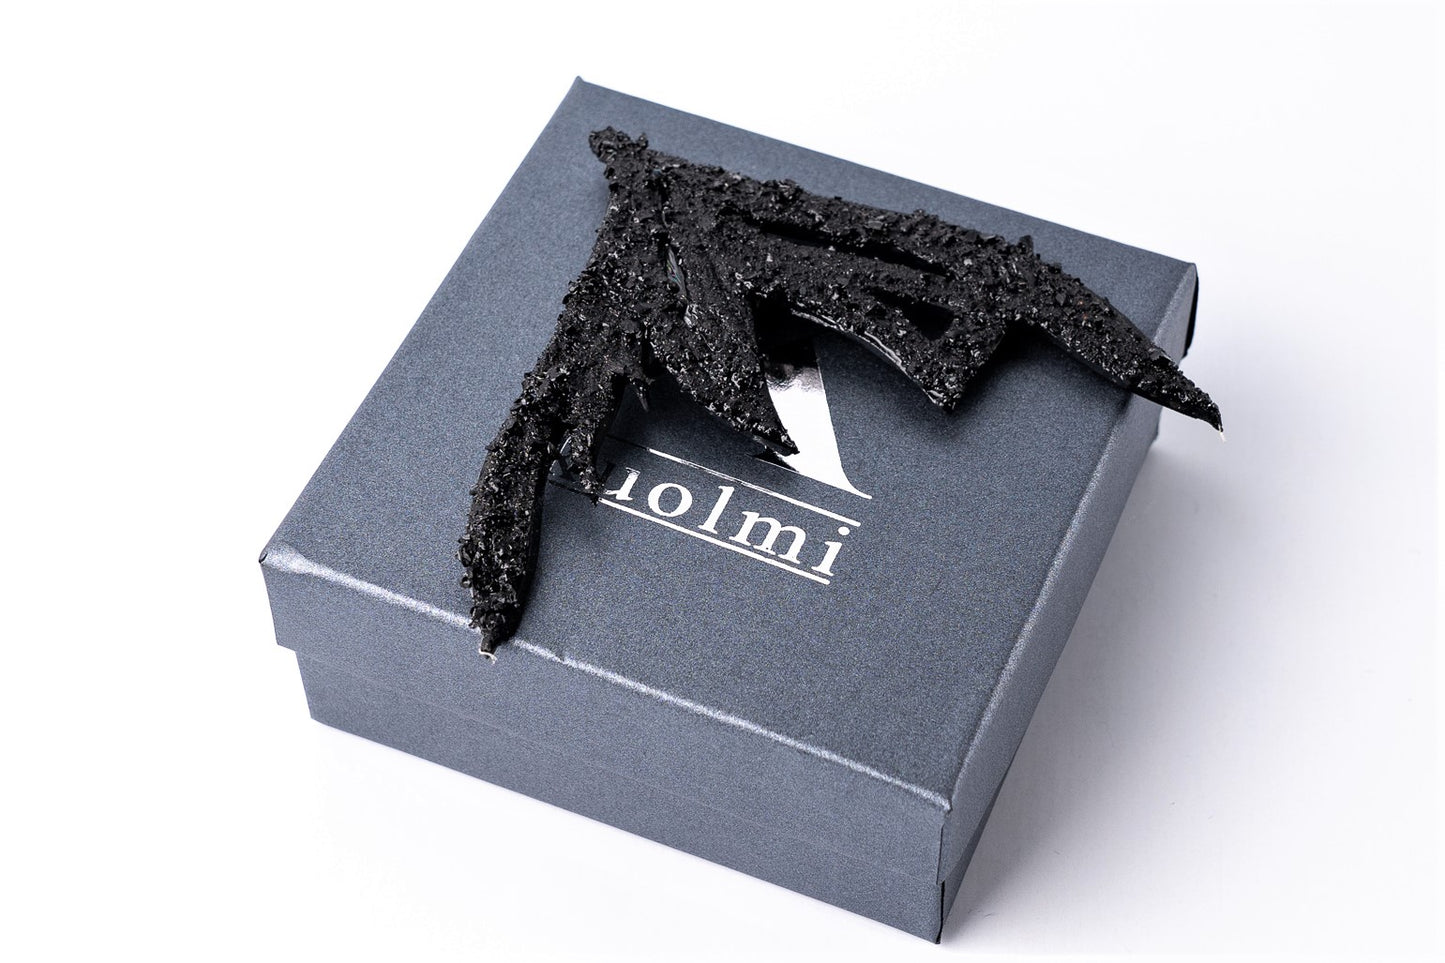 The KUOLMi handmade brooch is a fantastic accessory that makes the look perfect. Handmade black, light, and a very particular brooch made of coal and stainless steel.